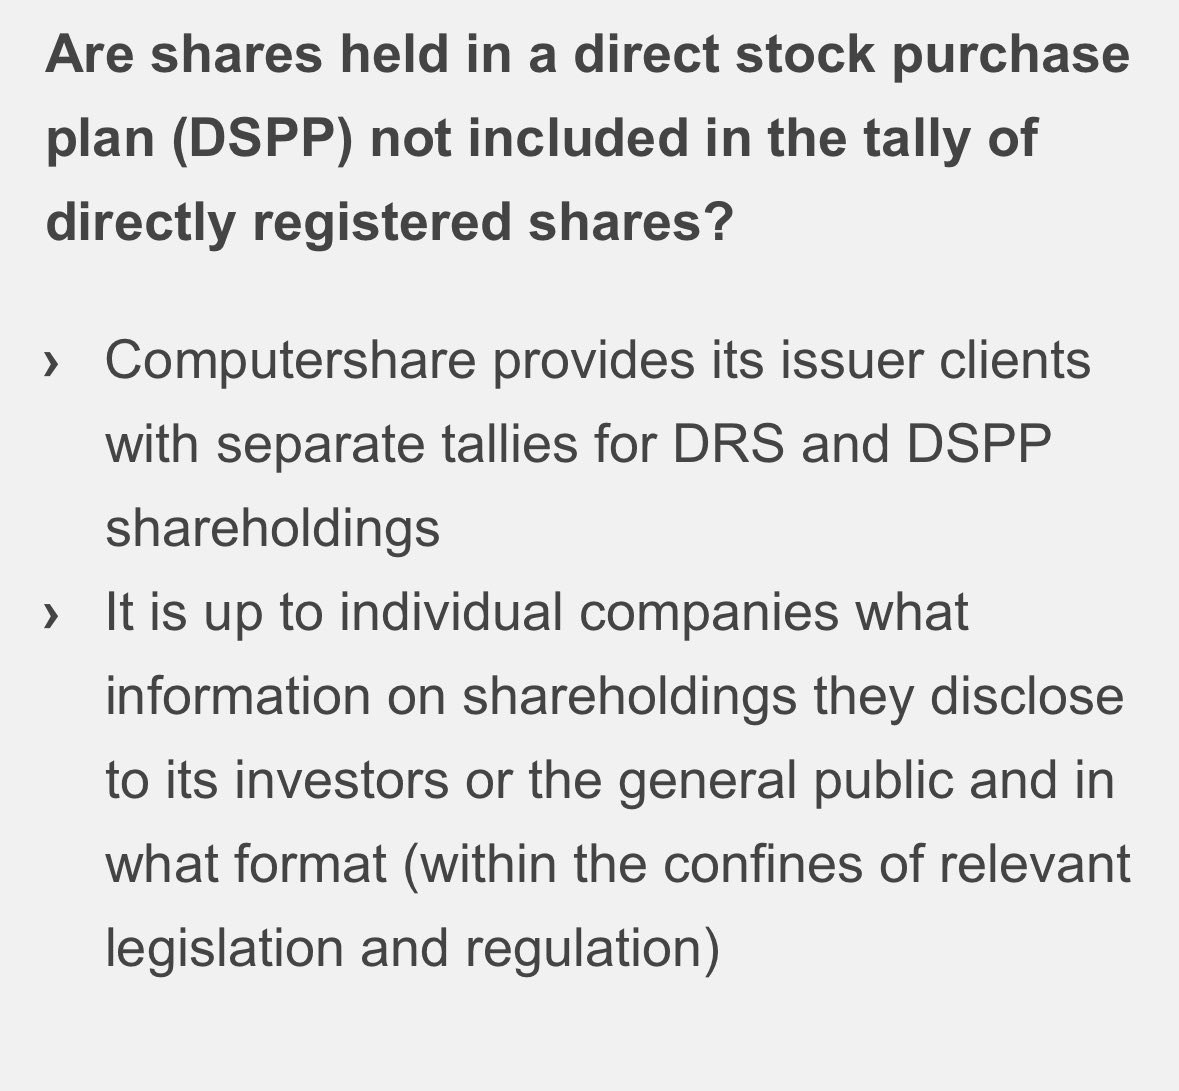 Woah. Straight from the new Computershare FAQs